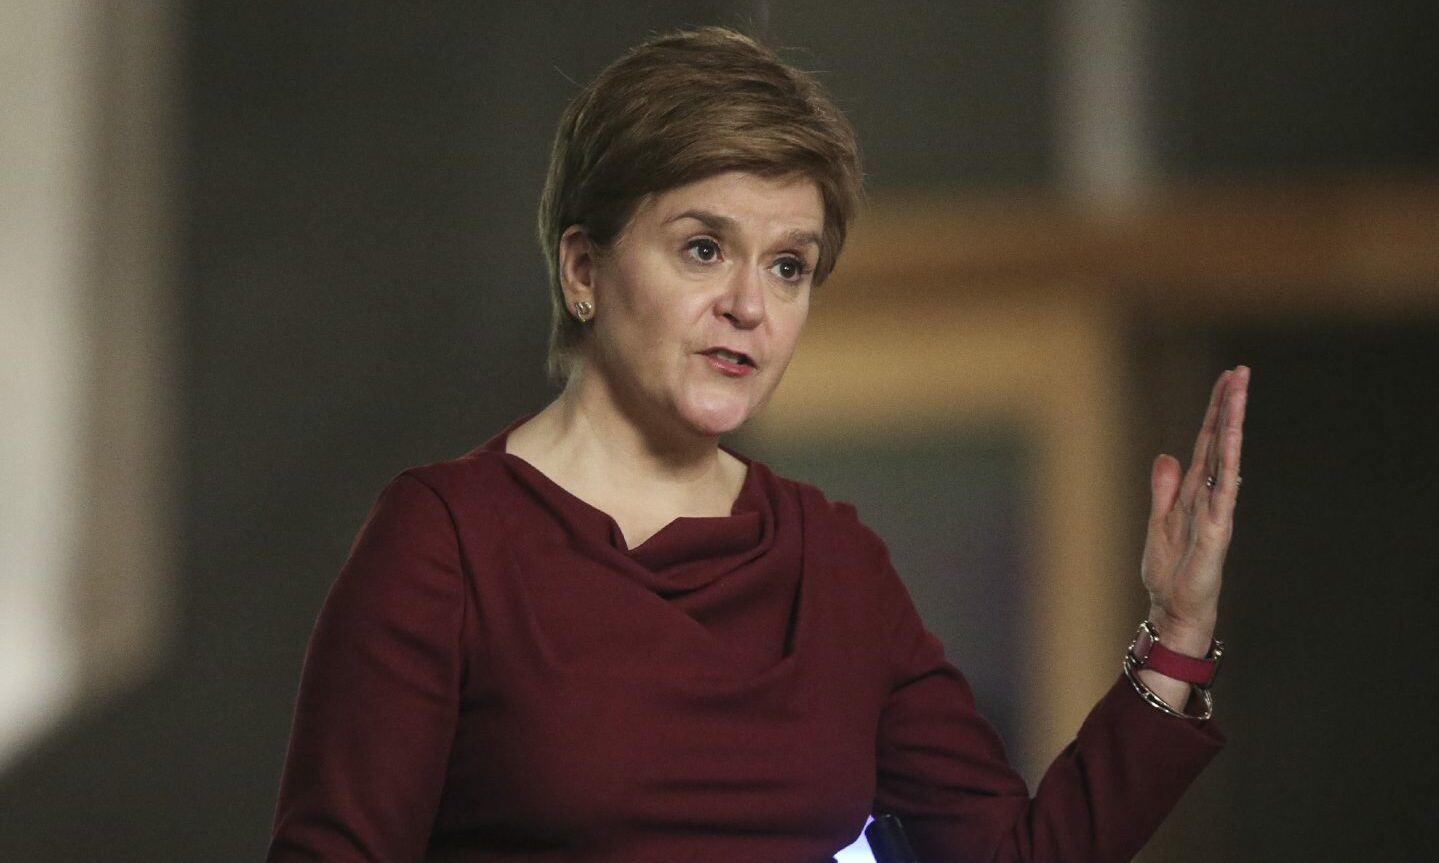 First Minister Nicola Sturgeon updating the press on Tuesday, after speaking in the Scottish Parliament on the Omicron variant.